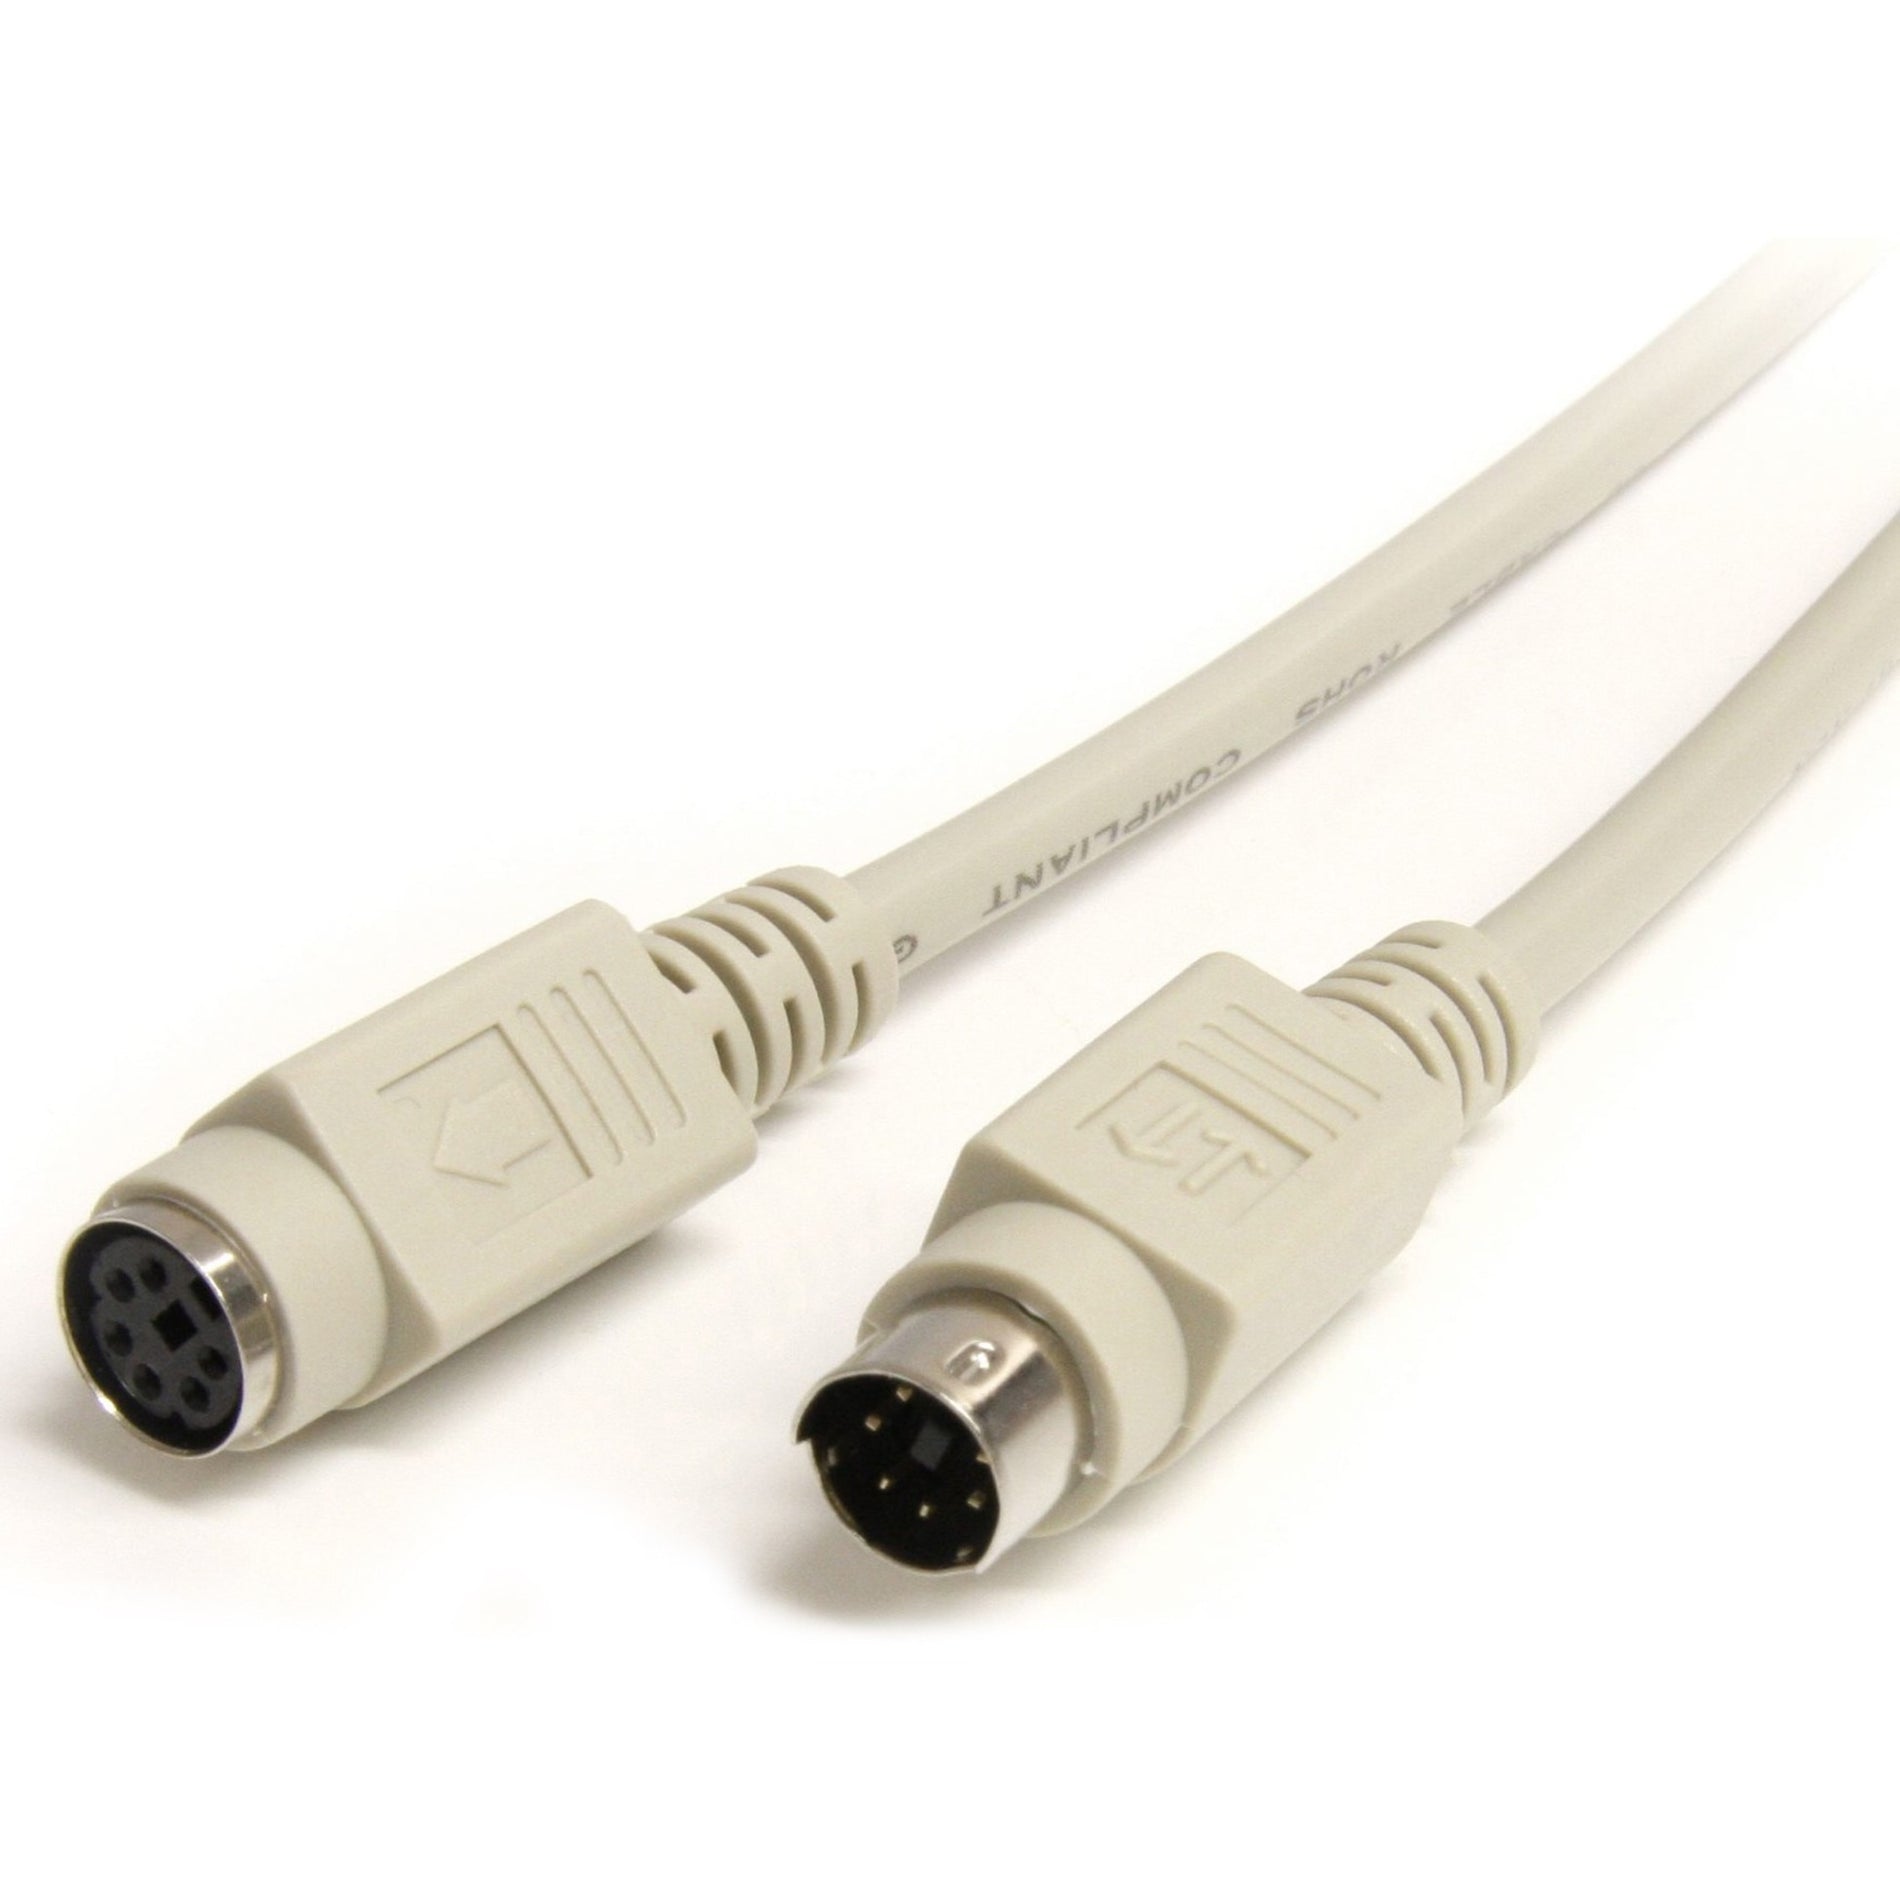 StarTech.com KXT102 PS/2 Keyboard/Mouse Extension Cable, 6 ft, Copper Conductor, Beige